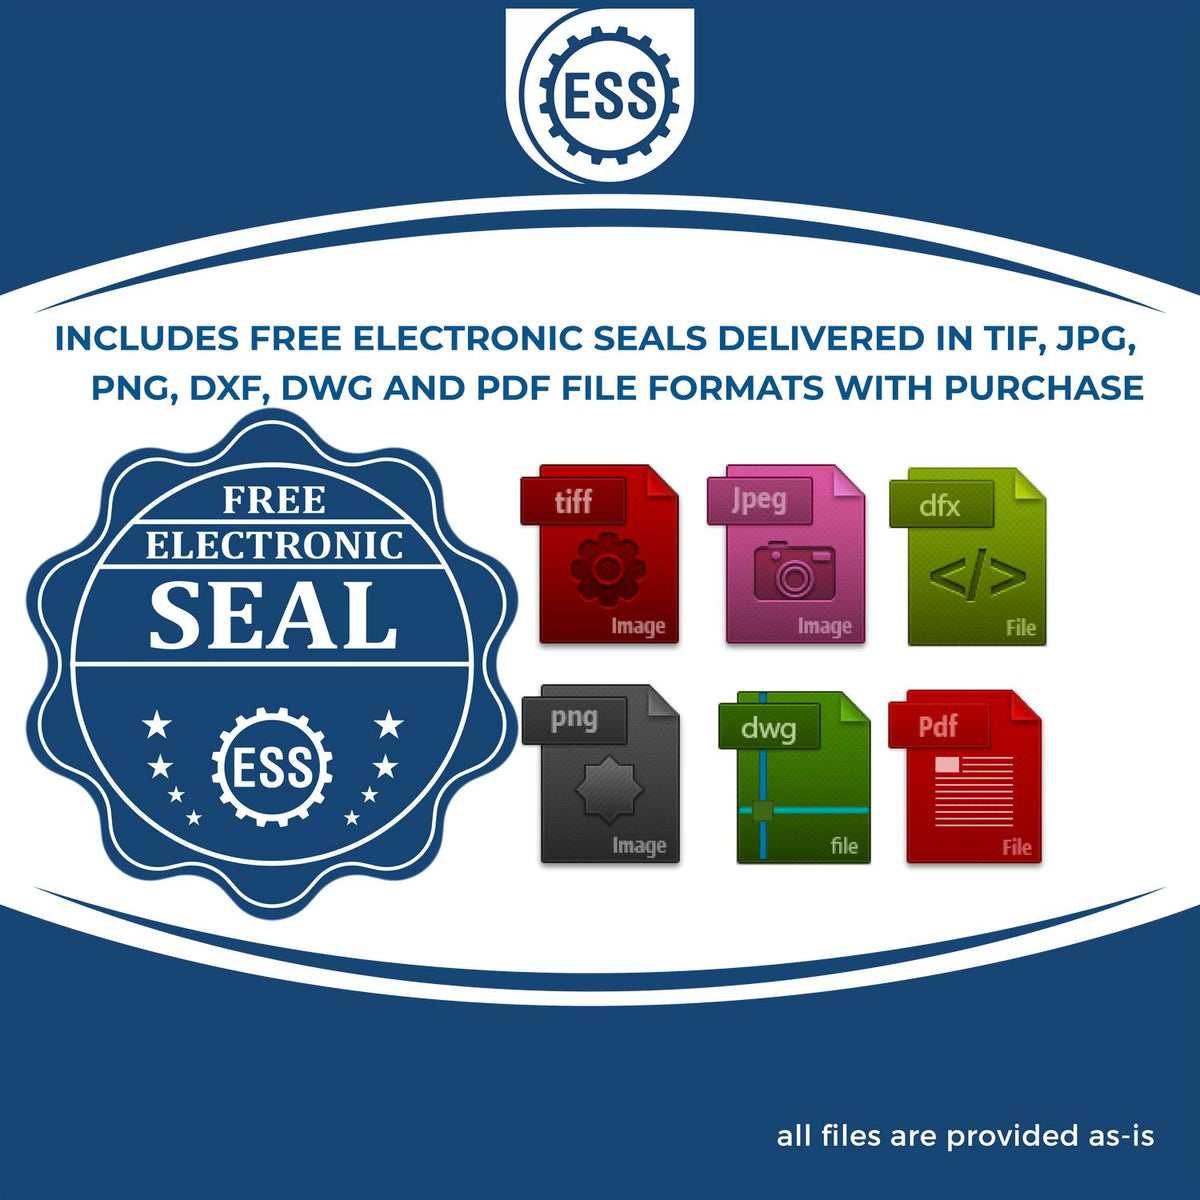 An infographic for the free electronic seal for the Long Reach Michigan PE Seal illustrating the different file type icons such as DXF, DWG, TIF, JPG and PNG.